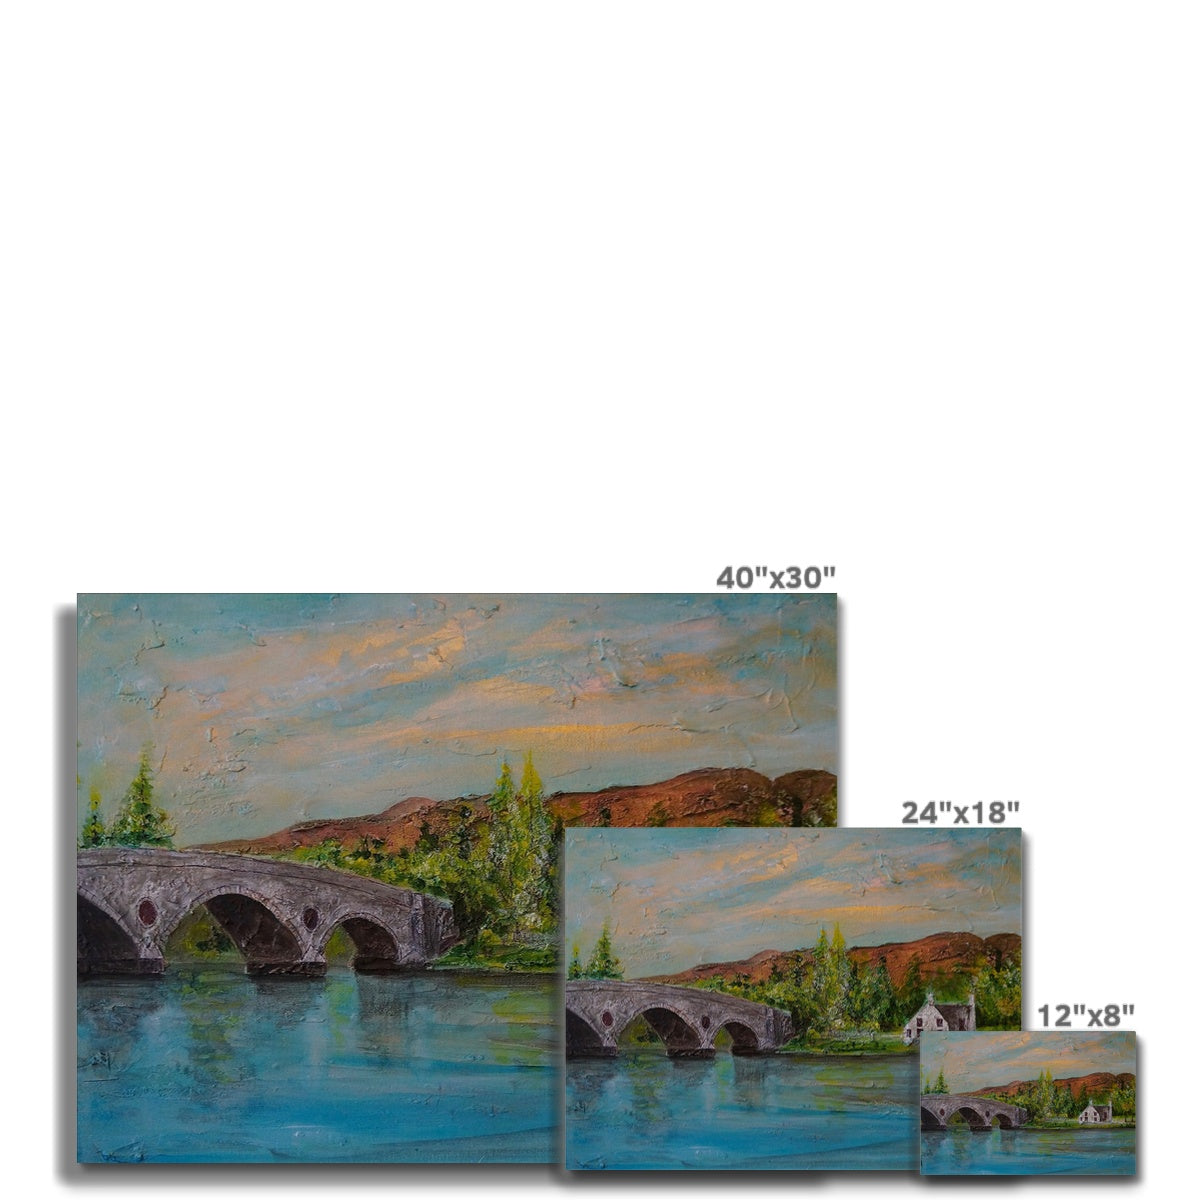 Kenmore Bridge ii Painting | Canvas From Scotland-Contemporary Stretched Canvas Prints-Scottish Highlands & Lowlands Art Gallery-Paintings, Prints, Homeware, Art Gifts From Scotland By Scottish Artist Kevin Hunter